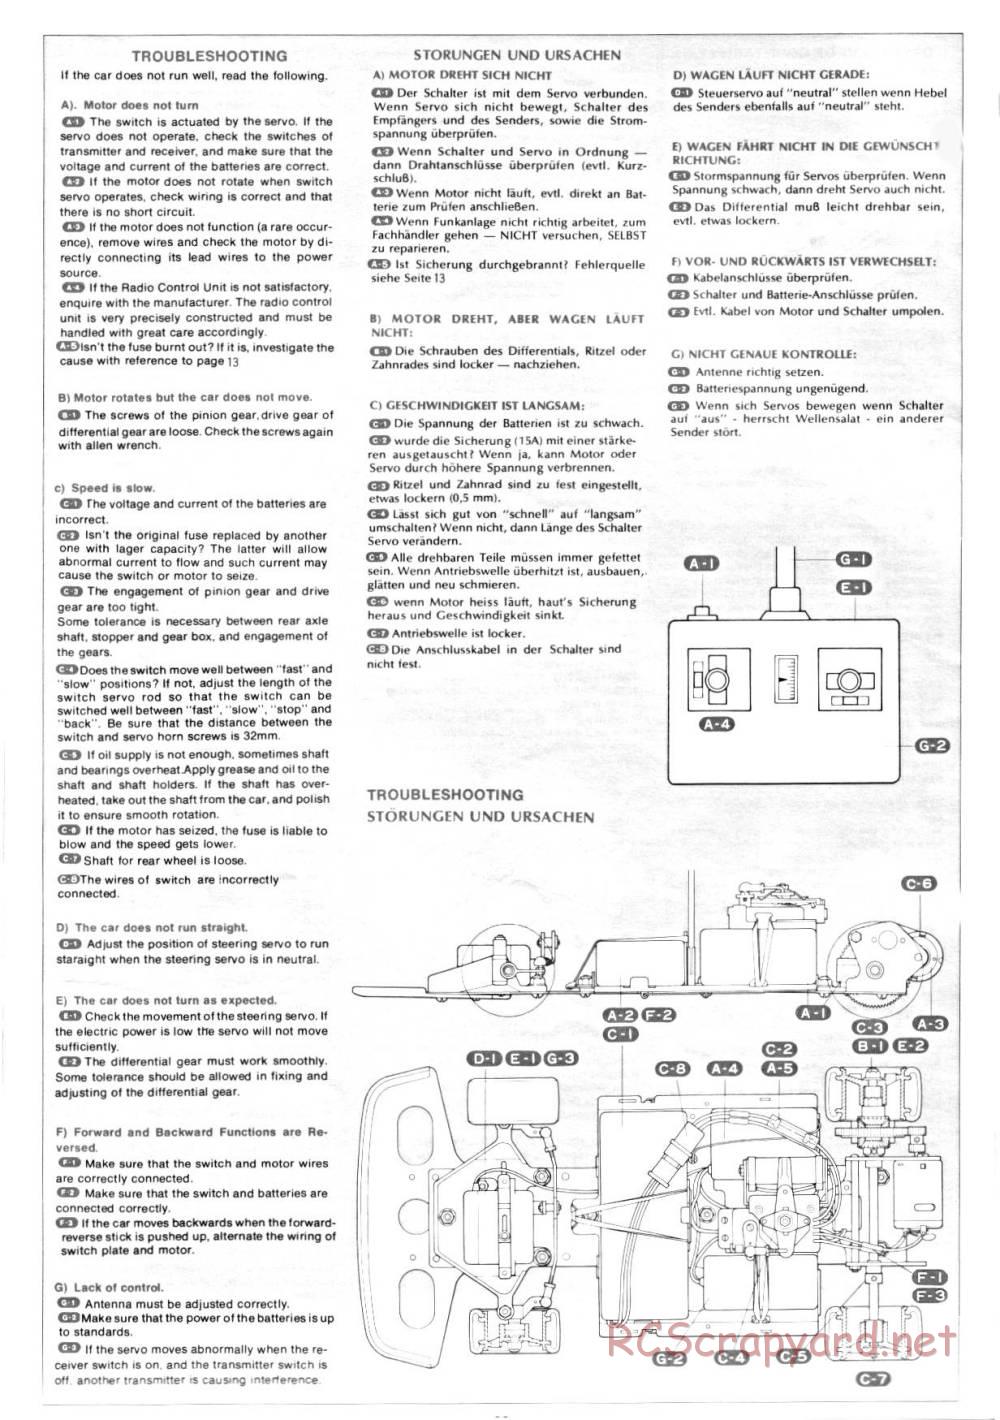 Tamiya - Lmbrghni Countach LP500S - 58005 - Manual - Page 14